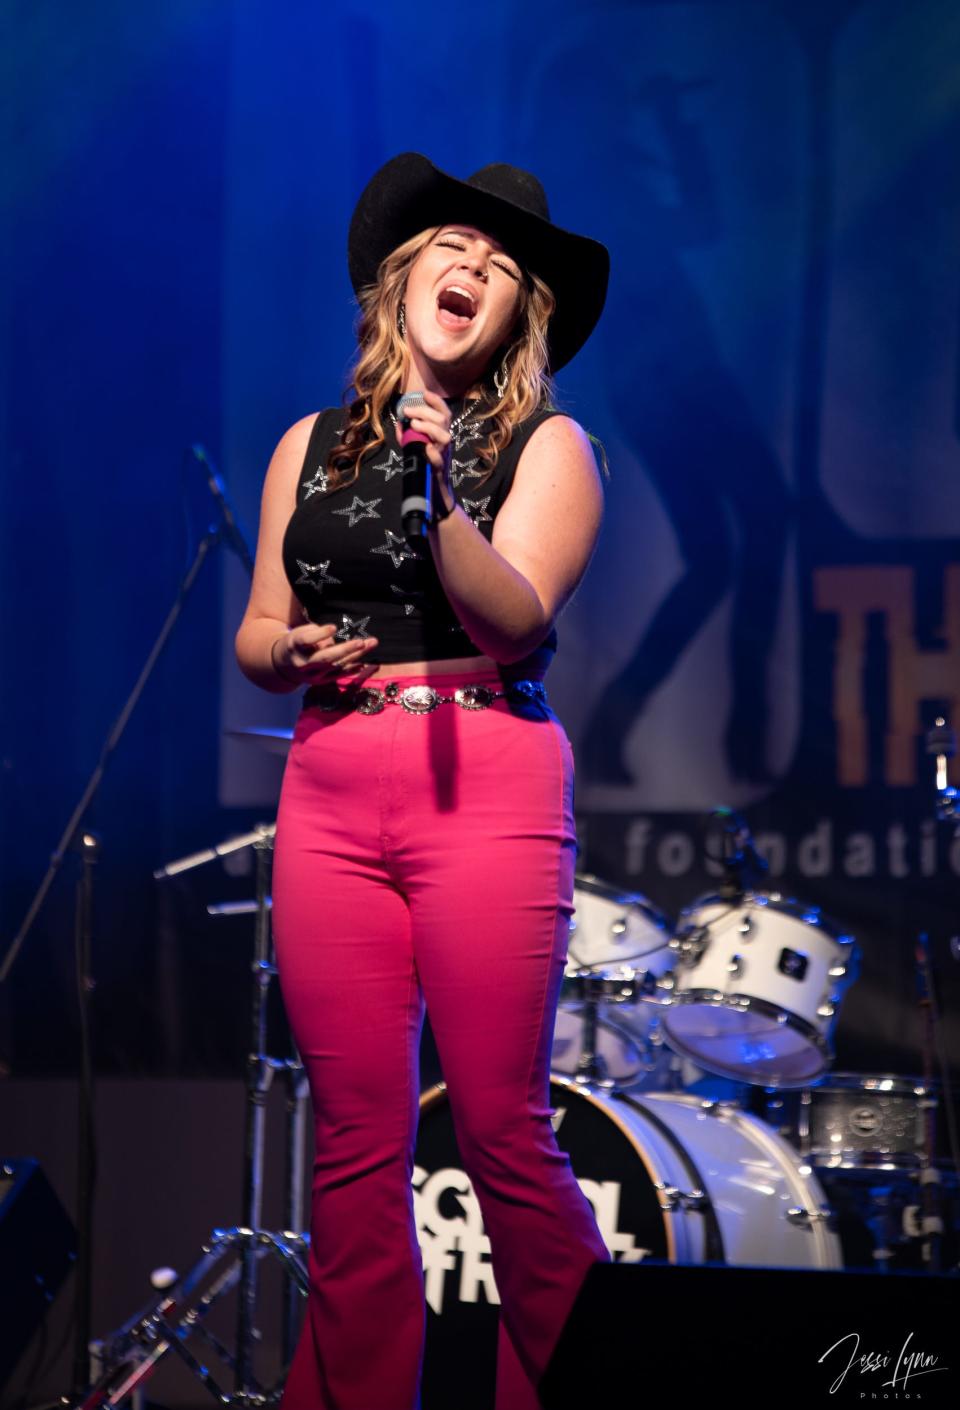 Singer Matrasa Lynn competed in the 2022 Rock the Stage Semi Finals Showcase and advanced to the finals. She returns to compete again in this year's Rock the Stage competition.